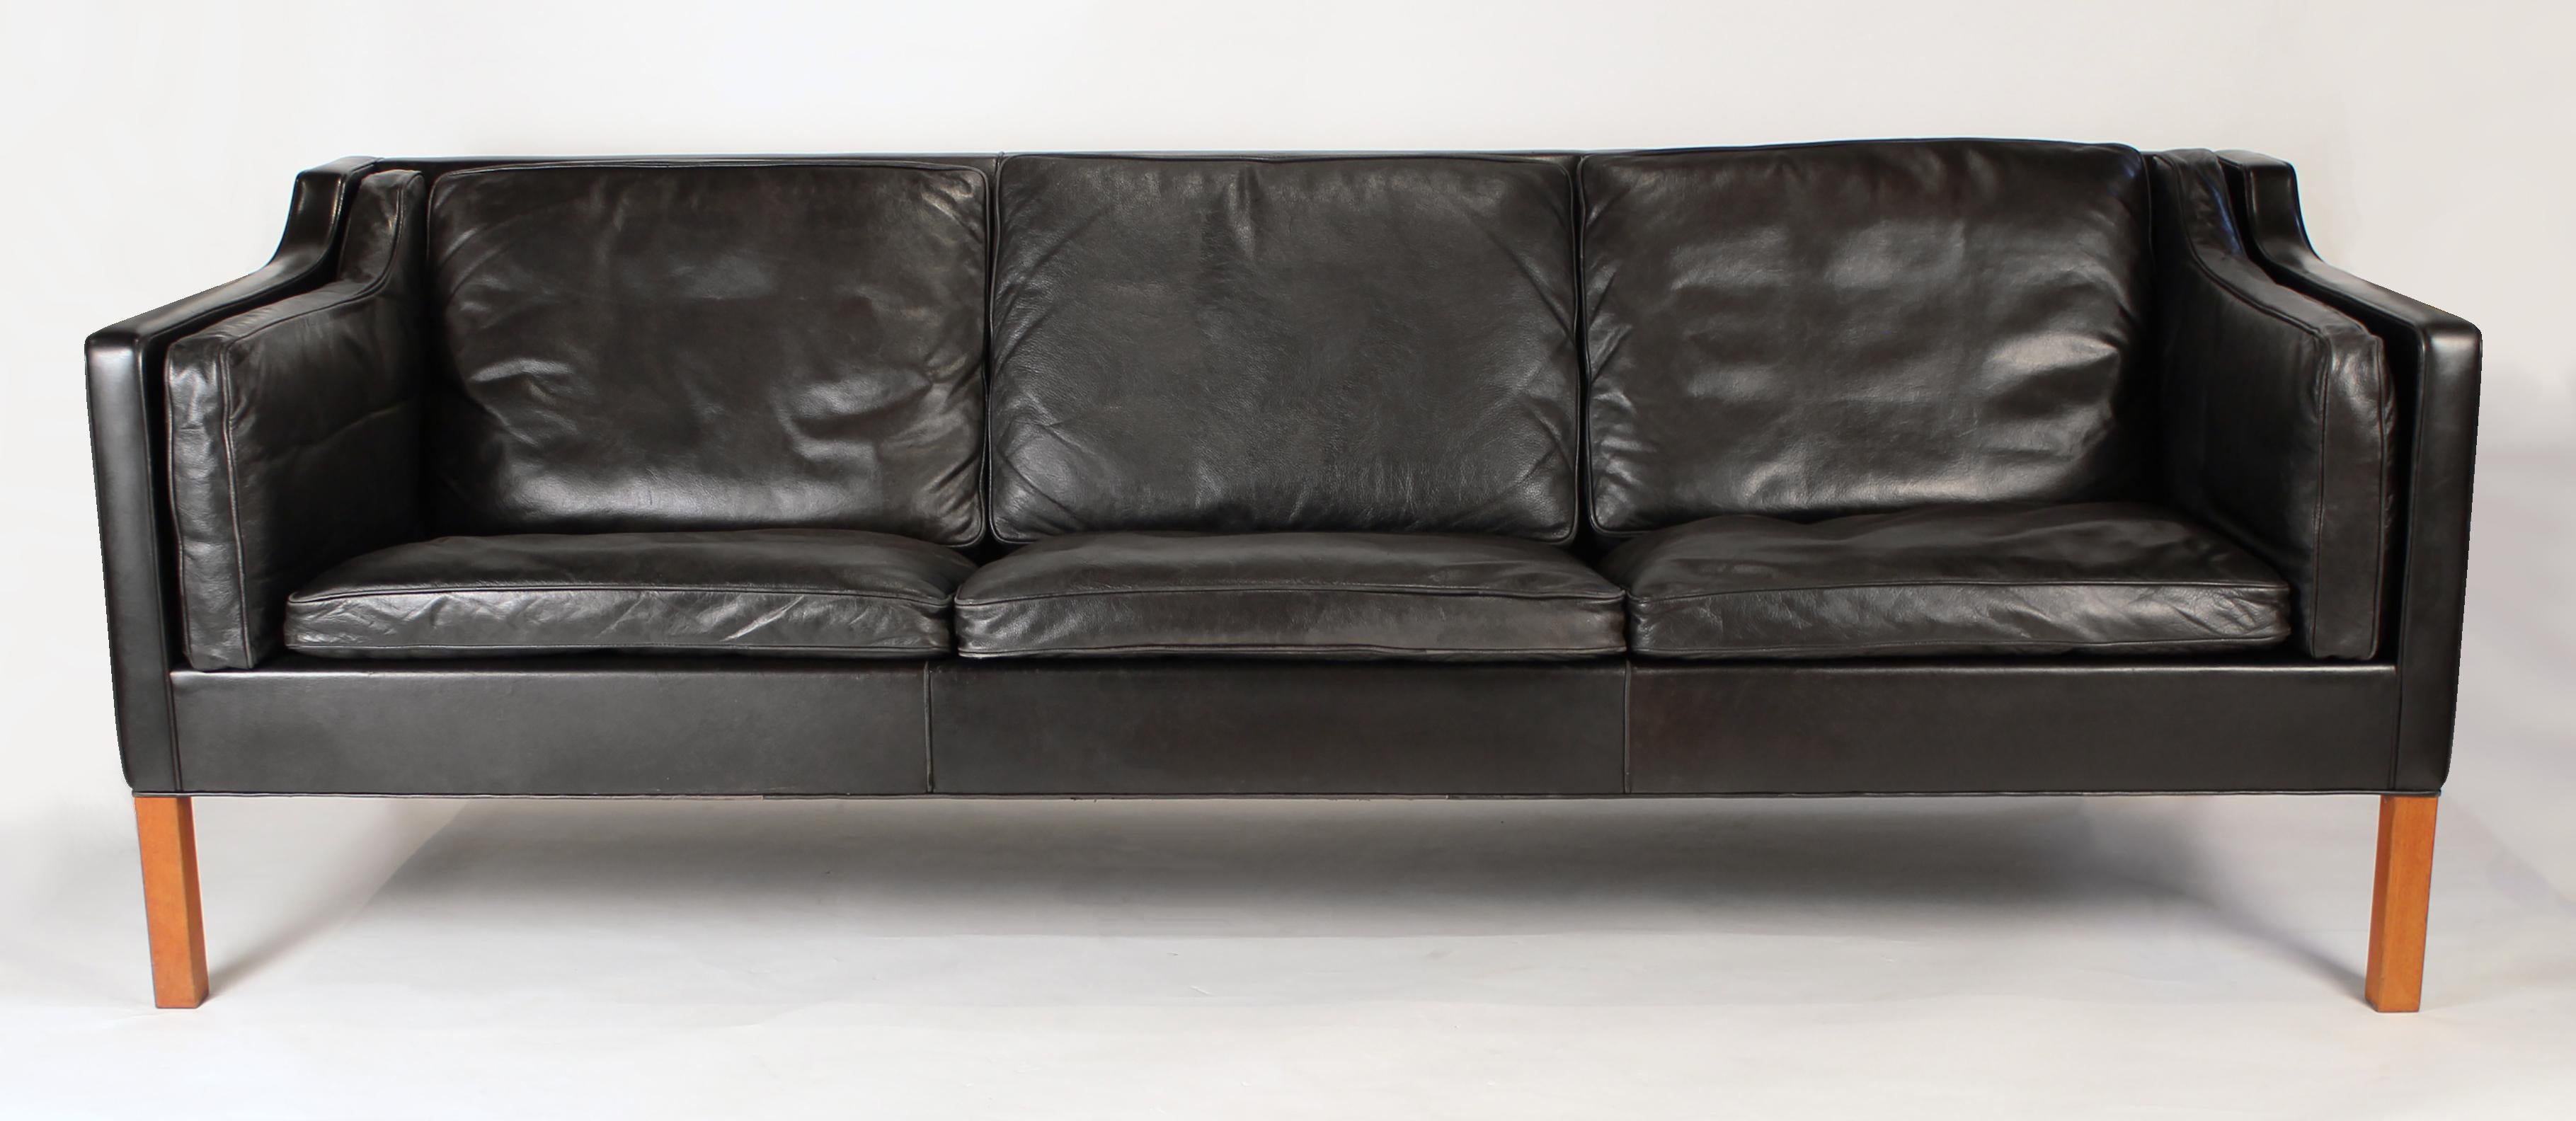 Sofa model 2213 in the original black leather designed by Borge Mogensen manufactured by Fredericia, Denmark, 1962. The sofa is in very good original condition designed with six down fil cushions.